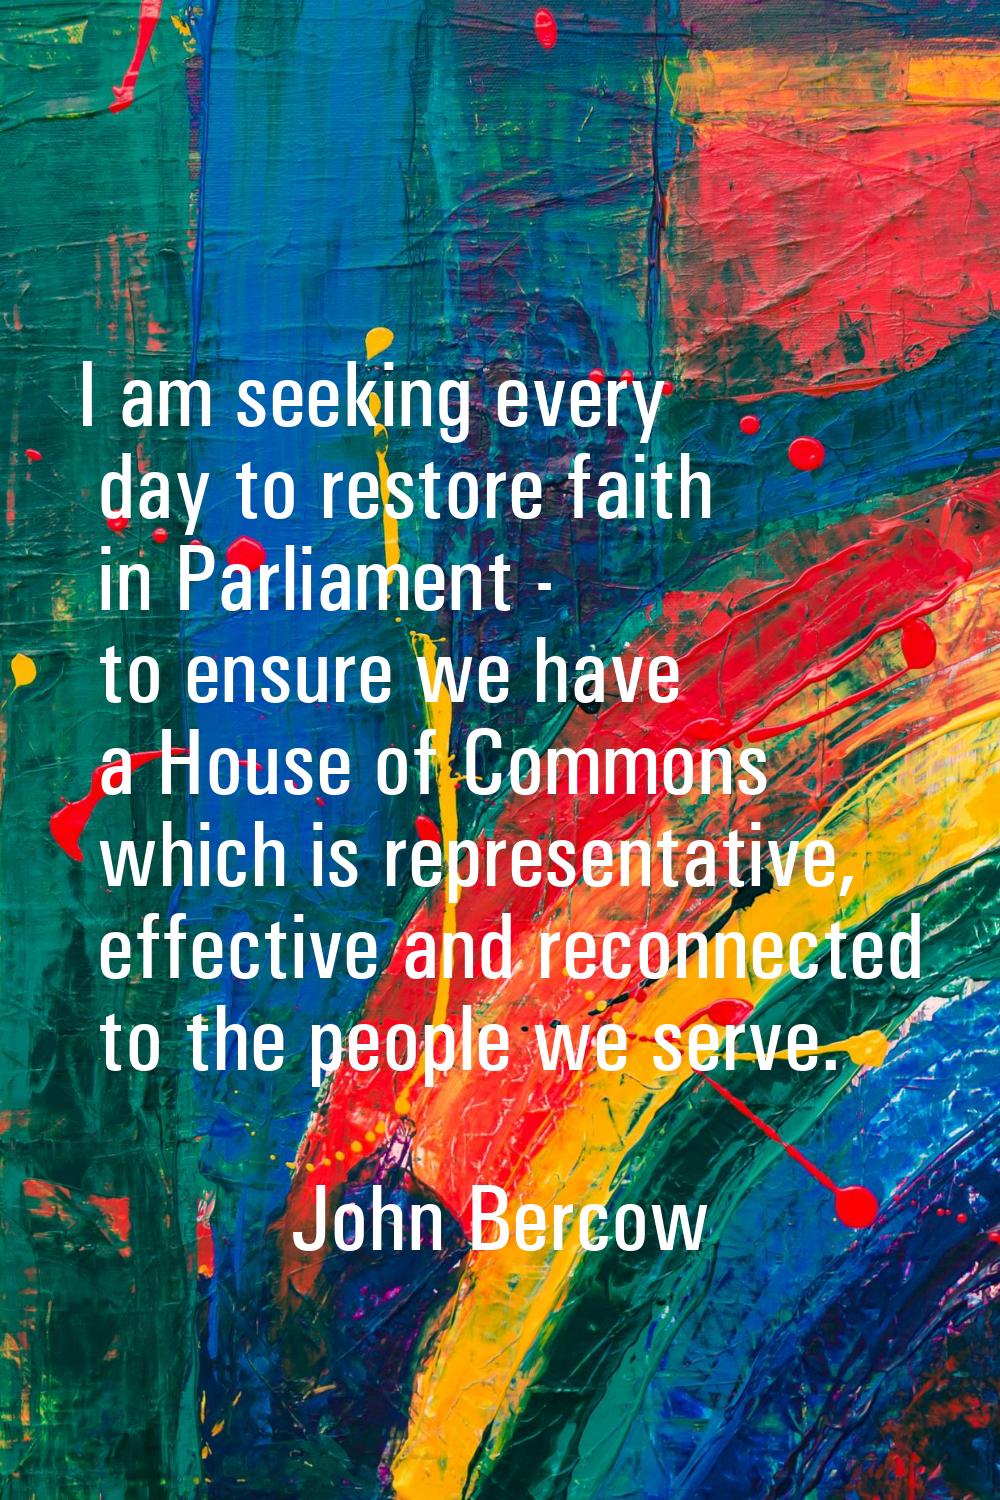 I am seeking every day to restore faith in Parliament - to ensure we have a House of Commons which 